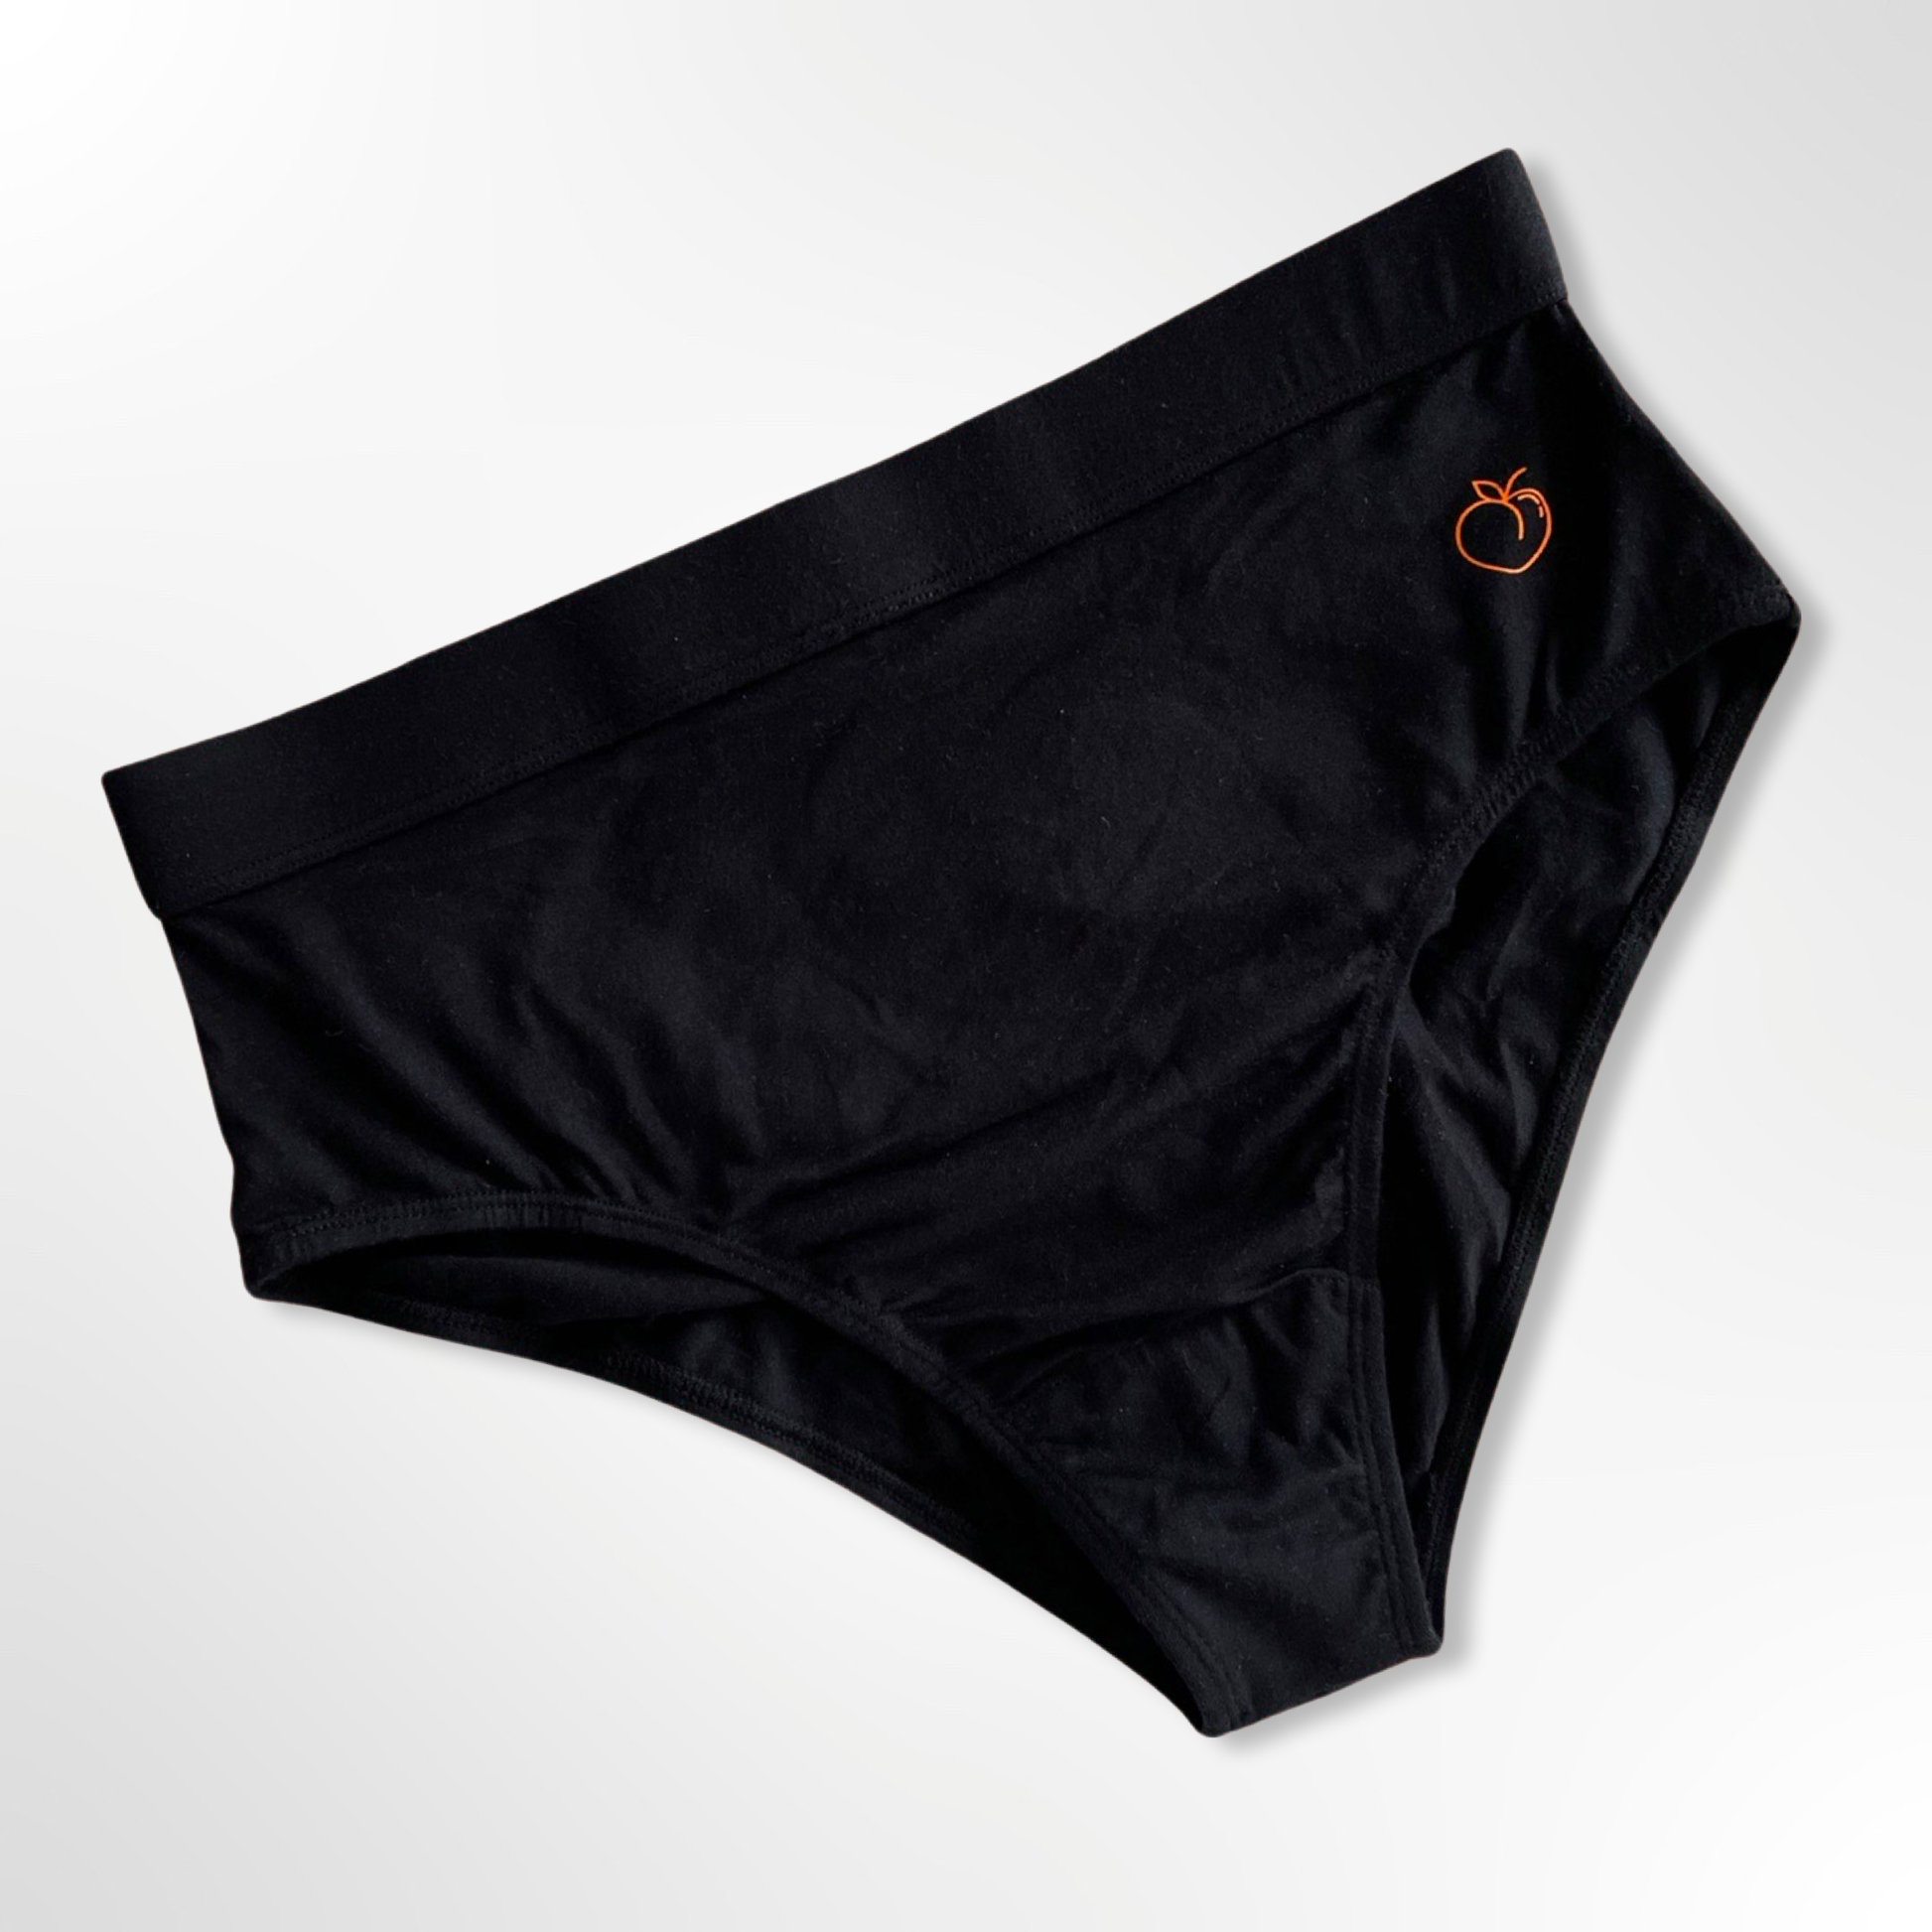 Sustainable briefs, infused with healing Zinc Oxide in black